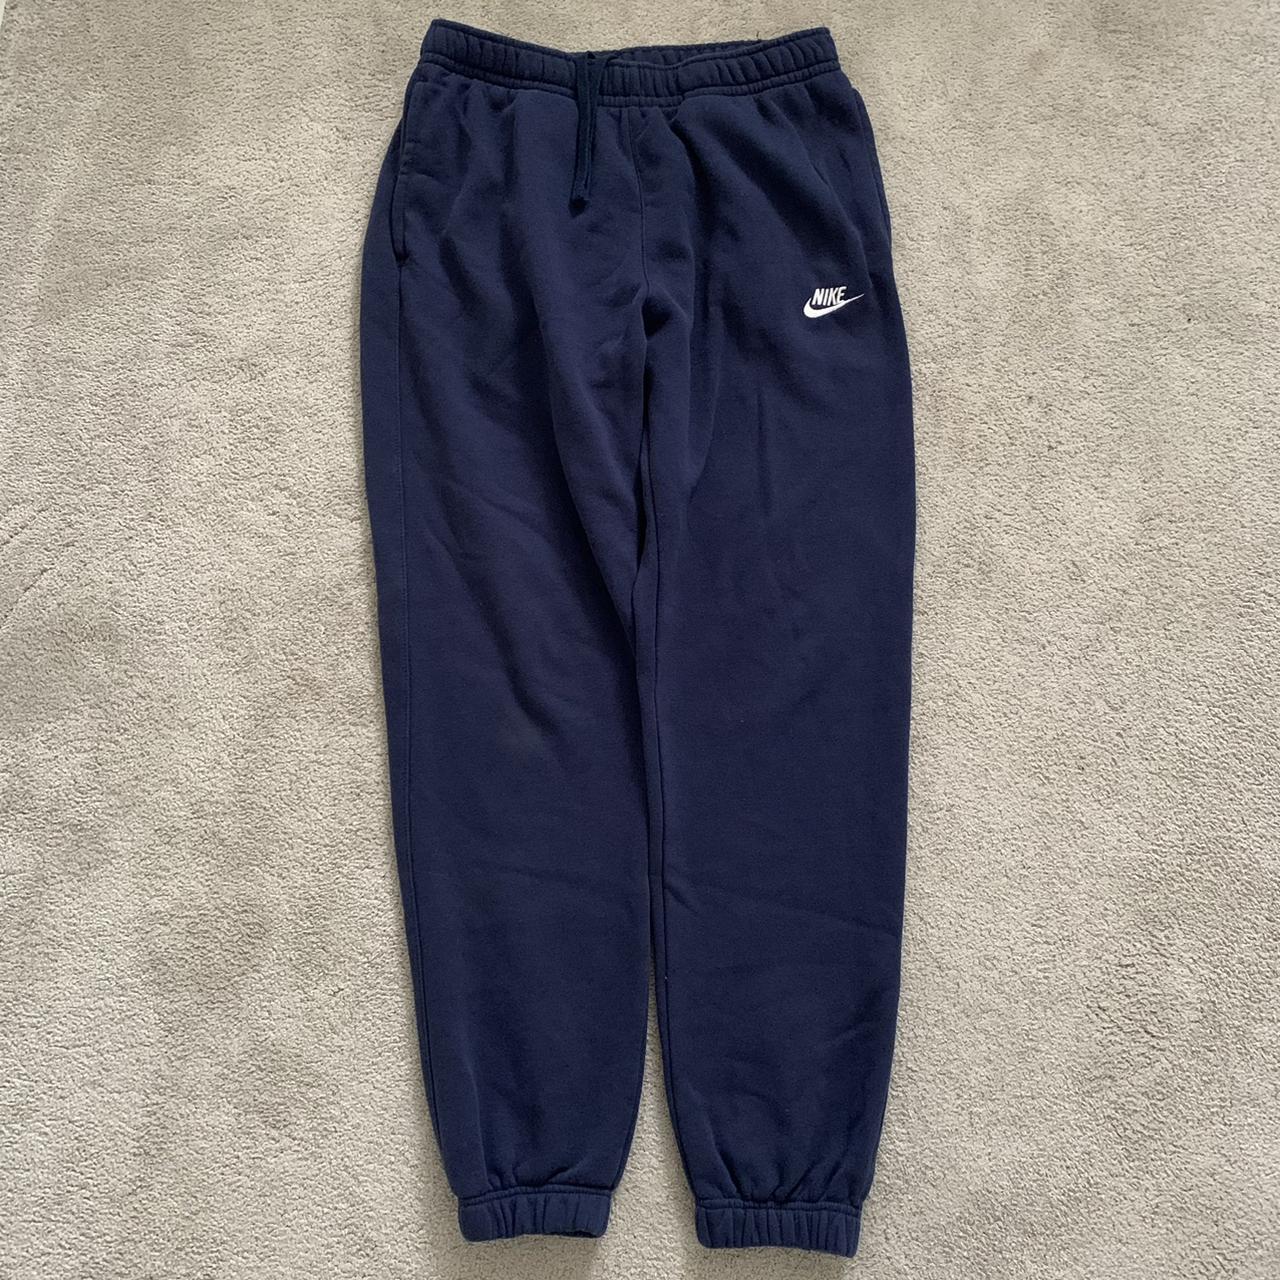 Nike Foundation Club Tracksuit Full Set in Navy and... - Depop